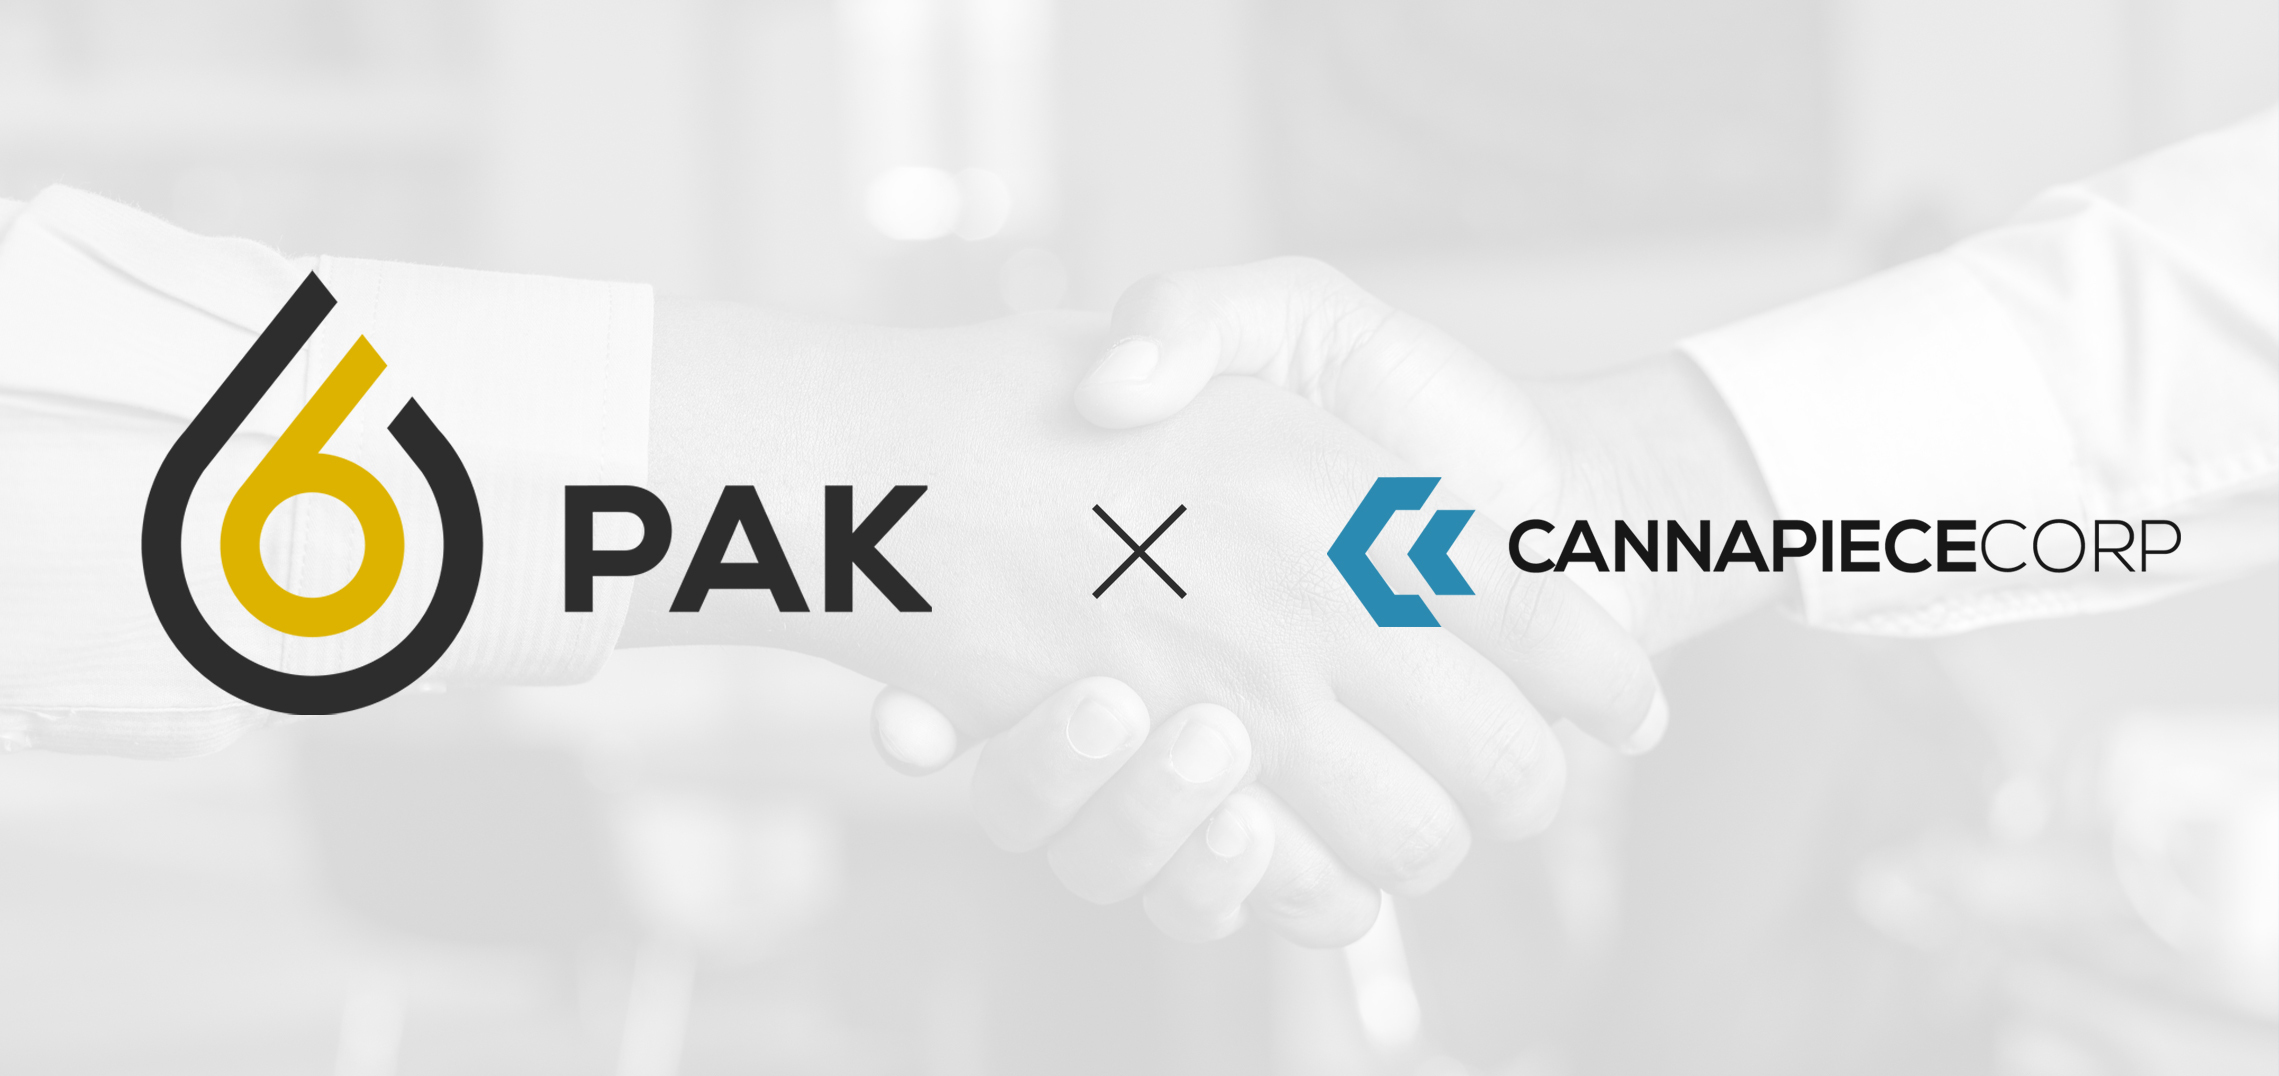 Handshake with 6Pak X CannaPiece Corp title overtop.